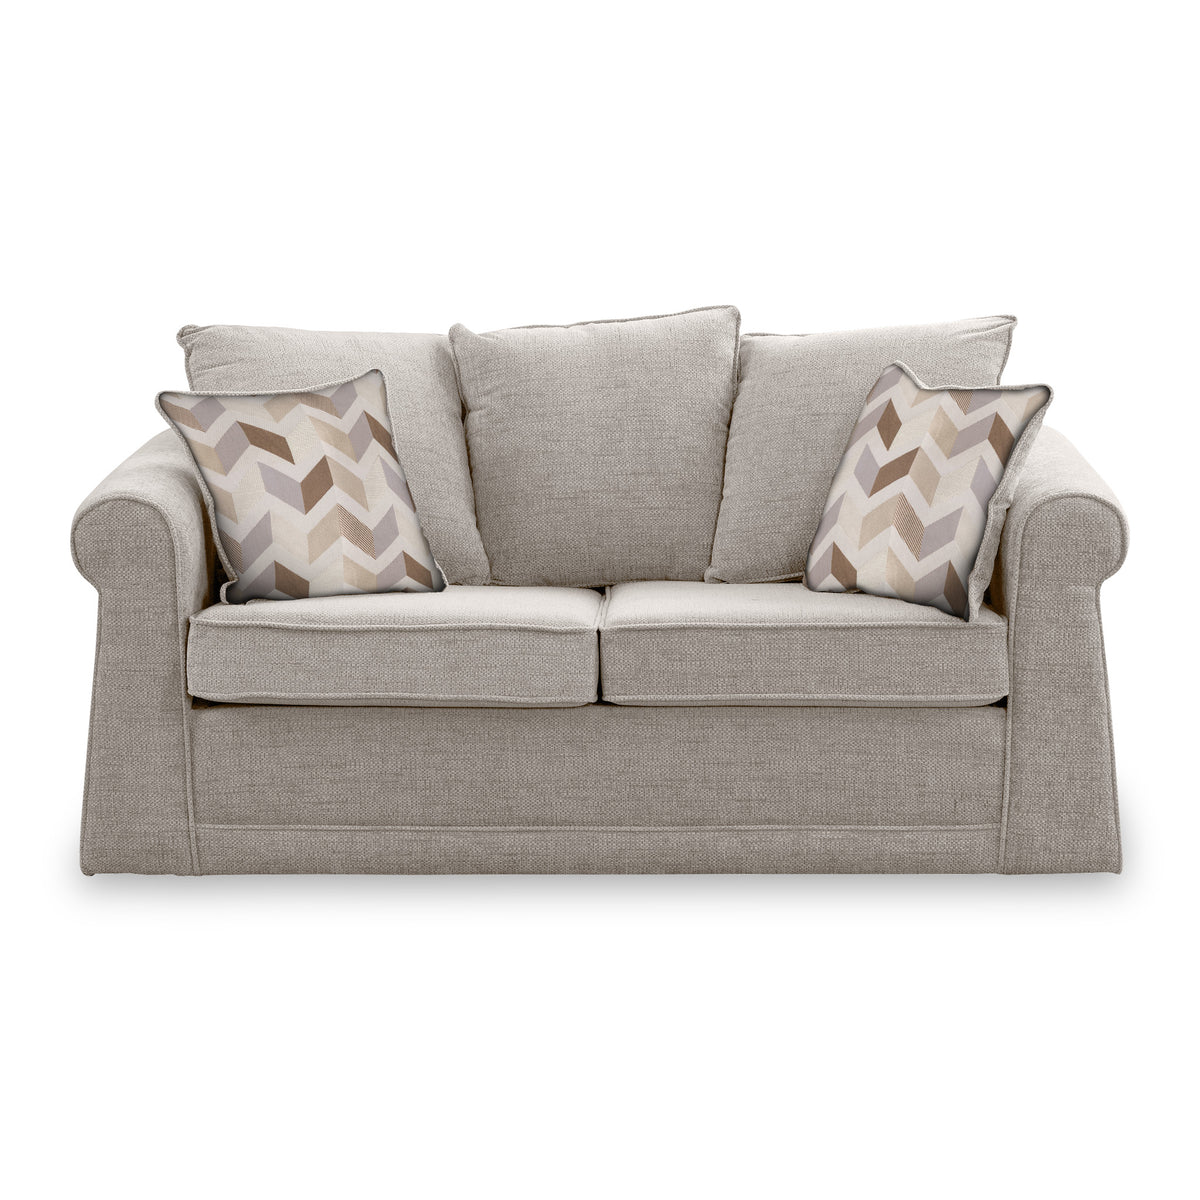 Branston Oatmeal Soft Weave 2 Seater Sofabed with Oatmeal Scatter Cushions from Roseland Furniture